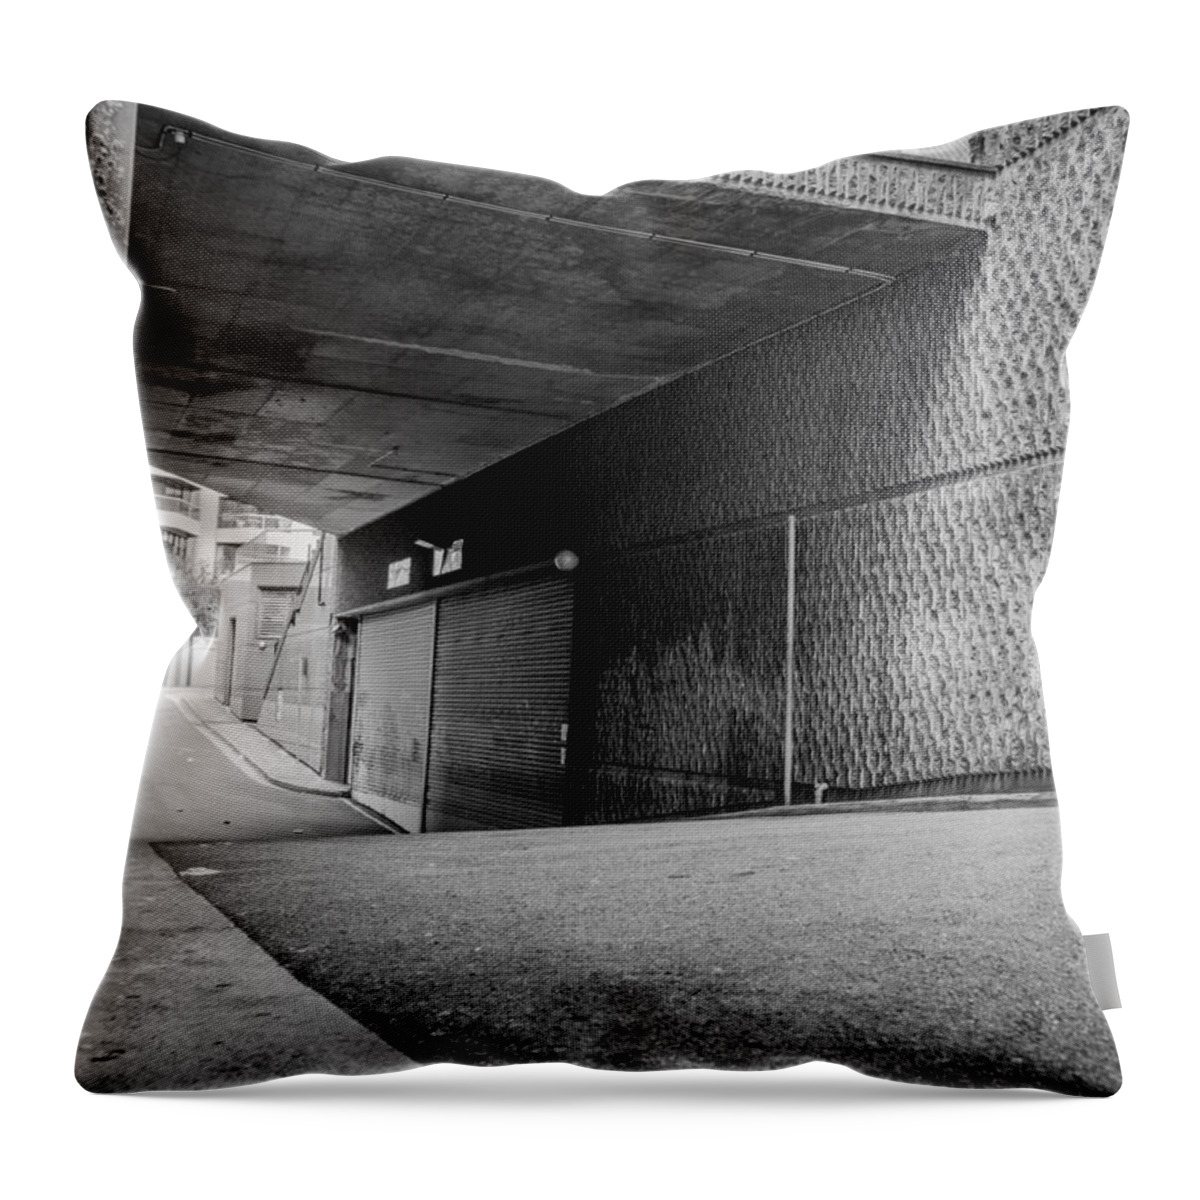 Alley Throw Pillow featuring the photograph Private Property by Kaleidoscopik Photography